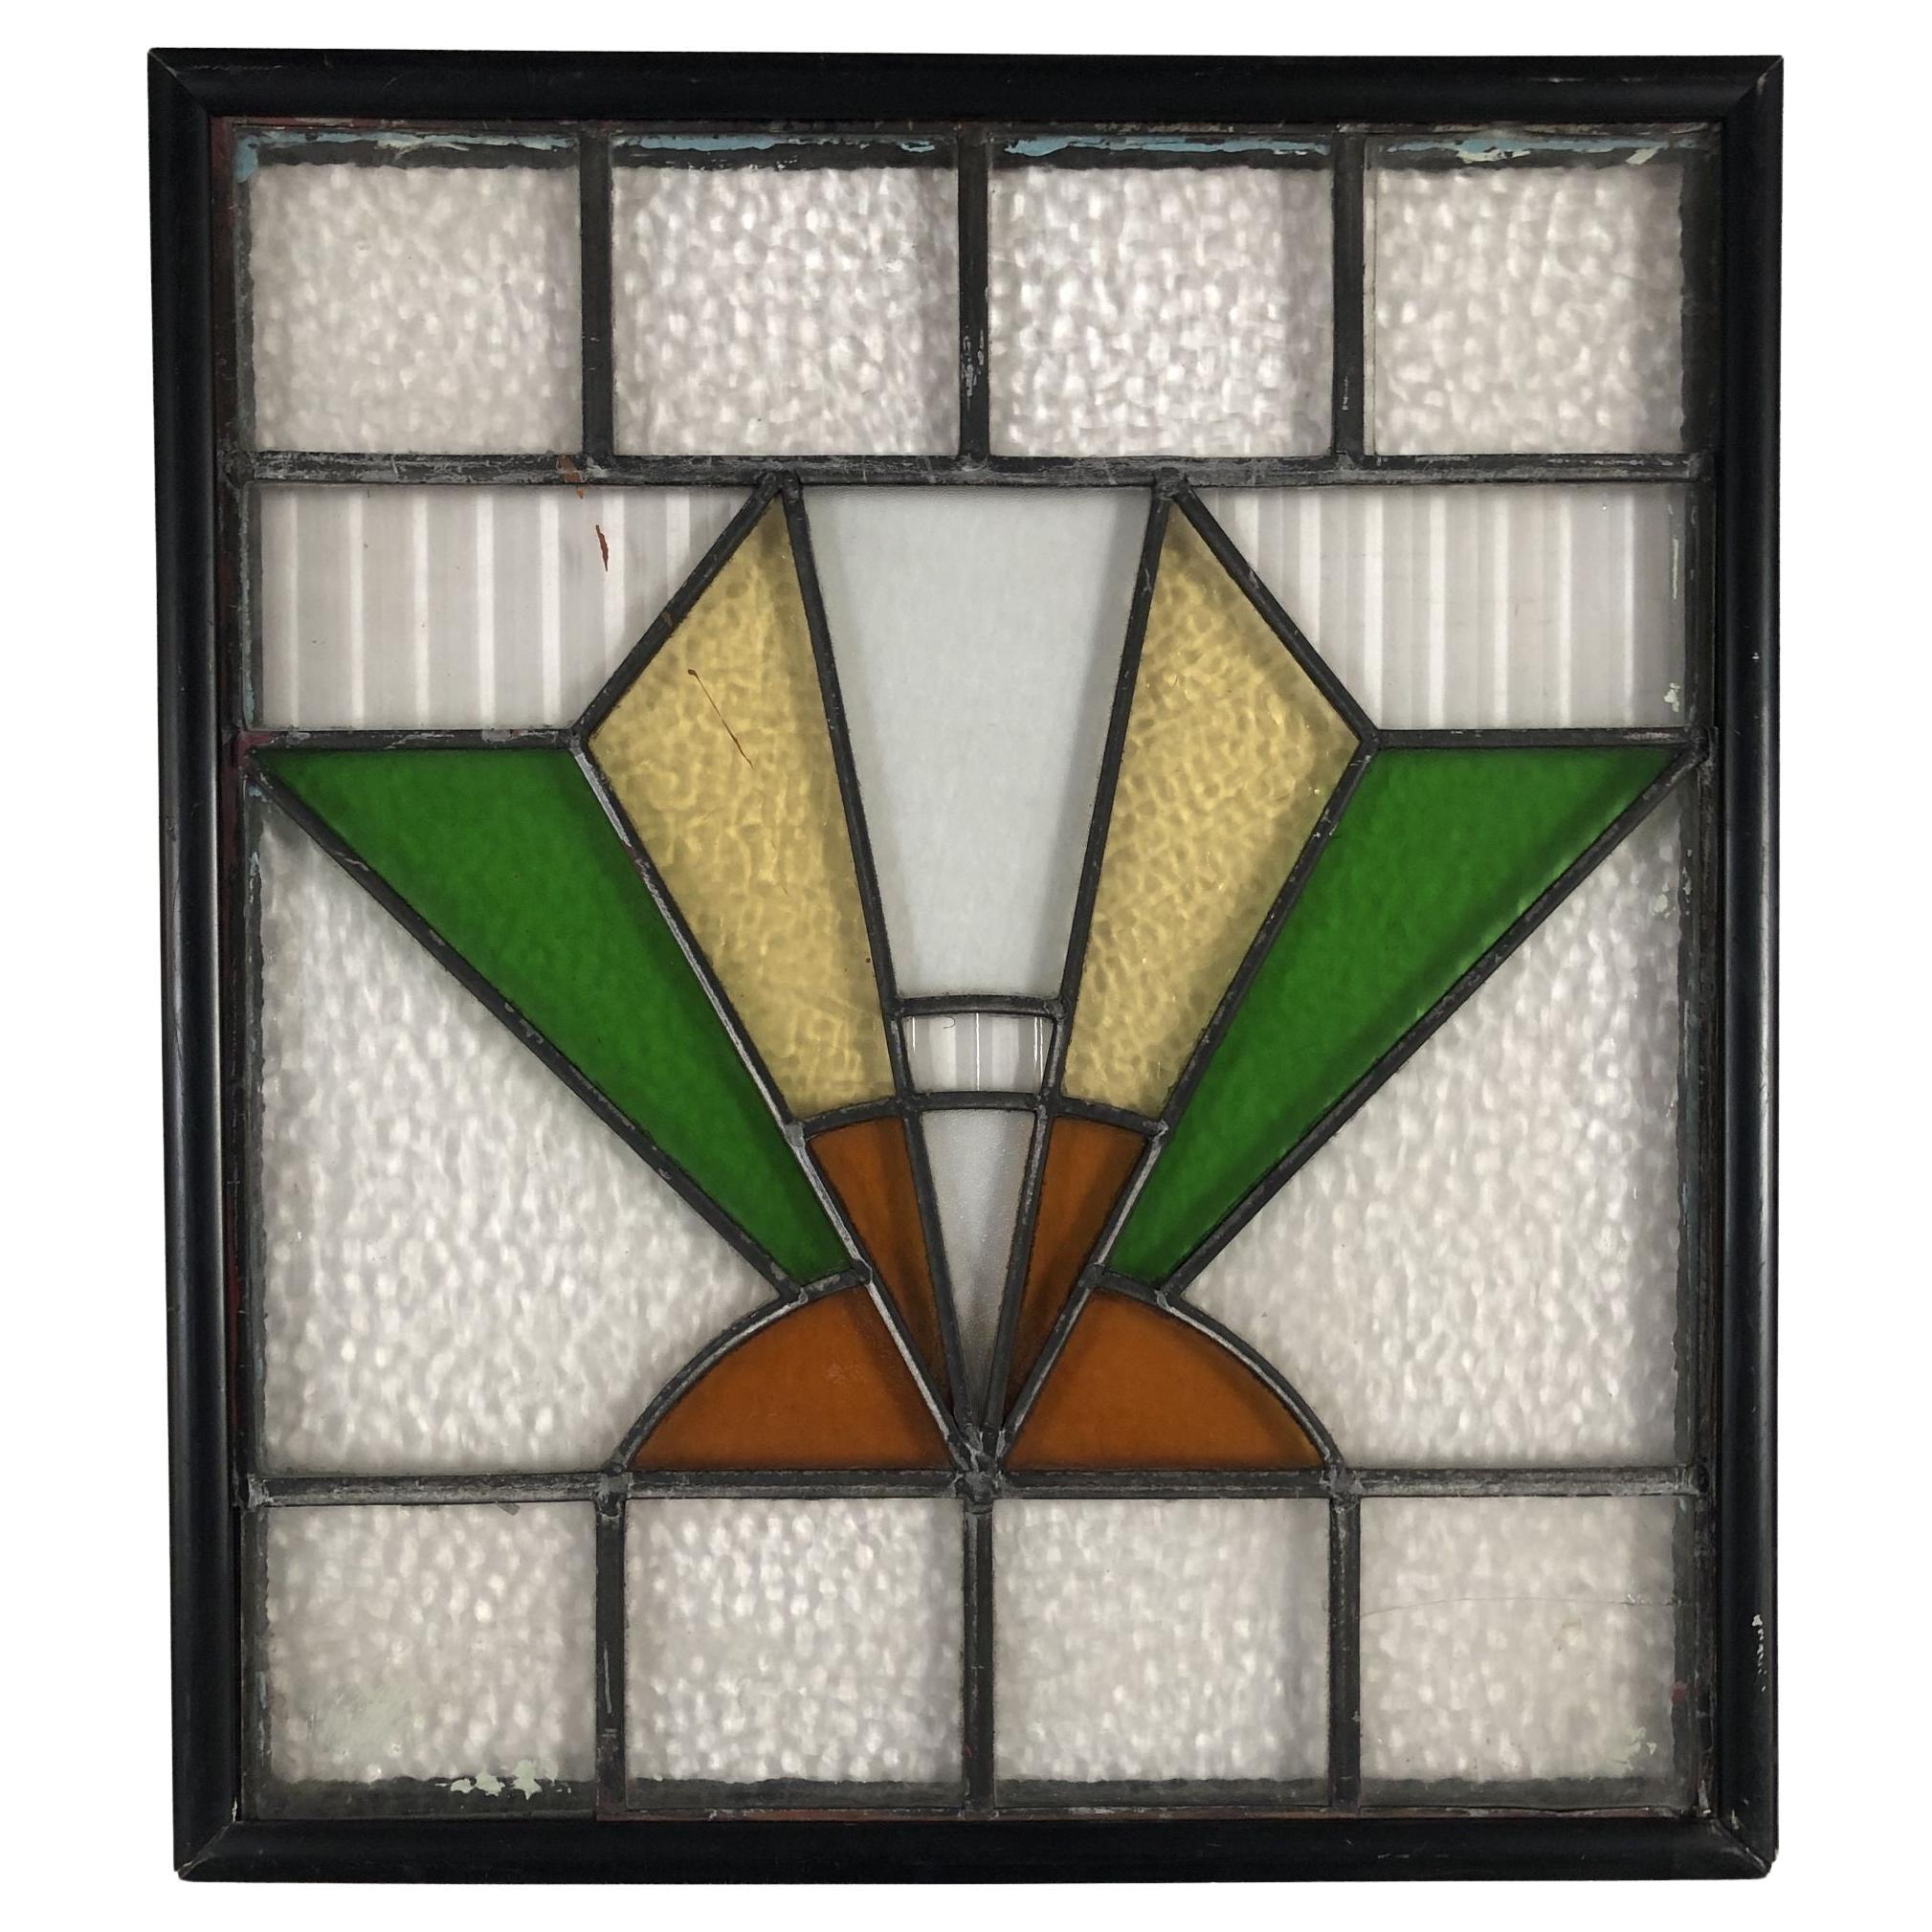 Geometric Art Deco Stained Glass Wall Art. W/ Wood Frame For Sale